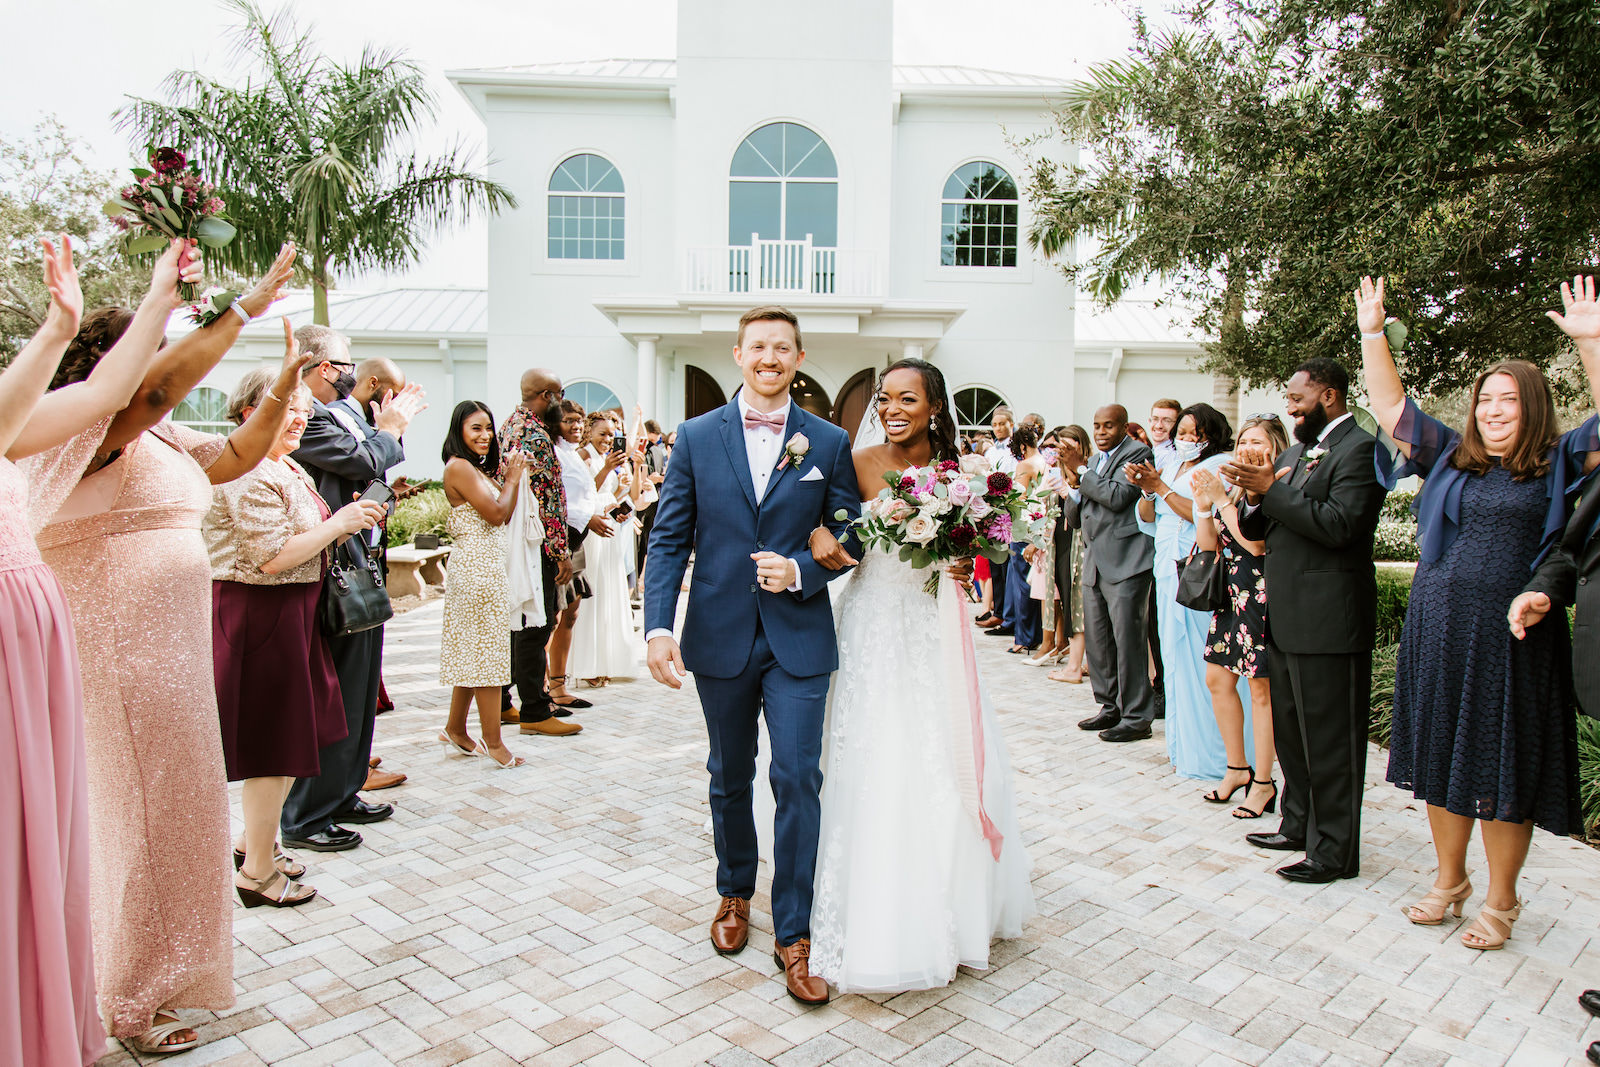 Church Wedding Bride and Groom Exit at St. Pete Wedding Venue Harborside Chapel | Groom in Navy Suit | Tulle and Lace Ballgown Wedding Dress